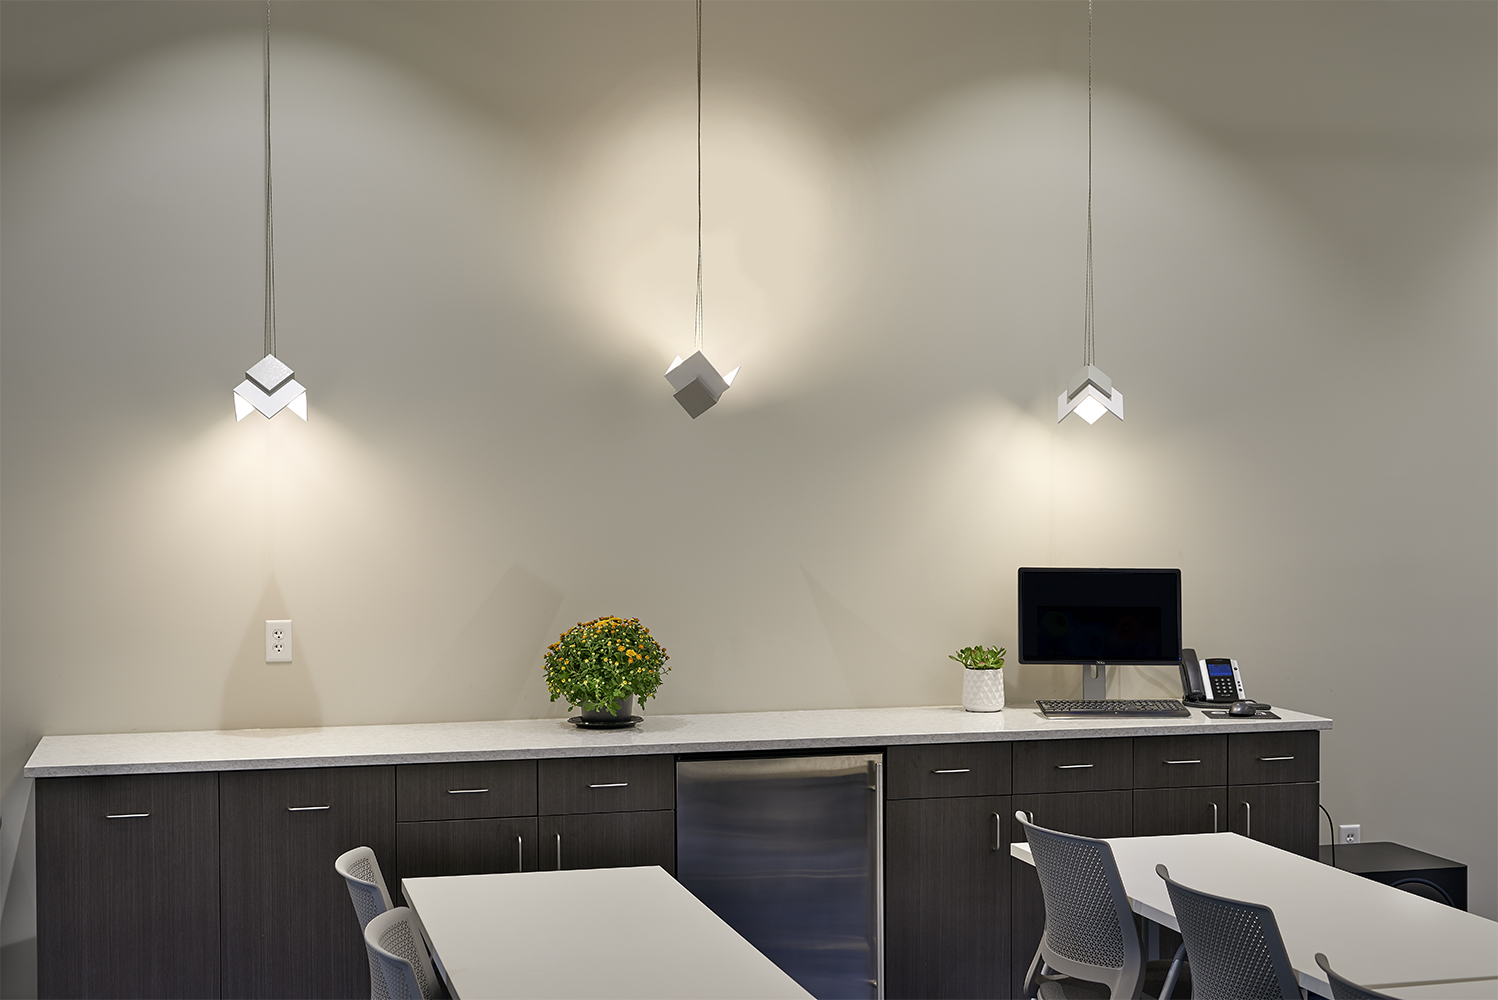 Petal OLED pendants are in an office lighting application along a meeting room wall.